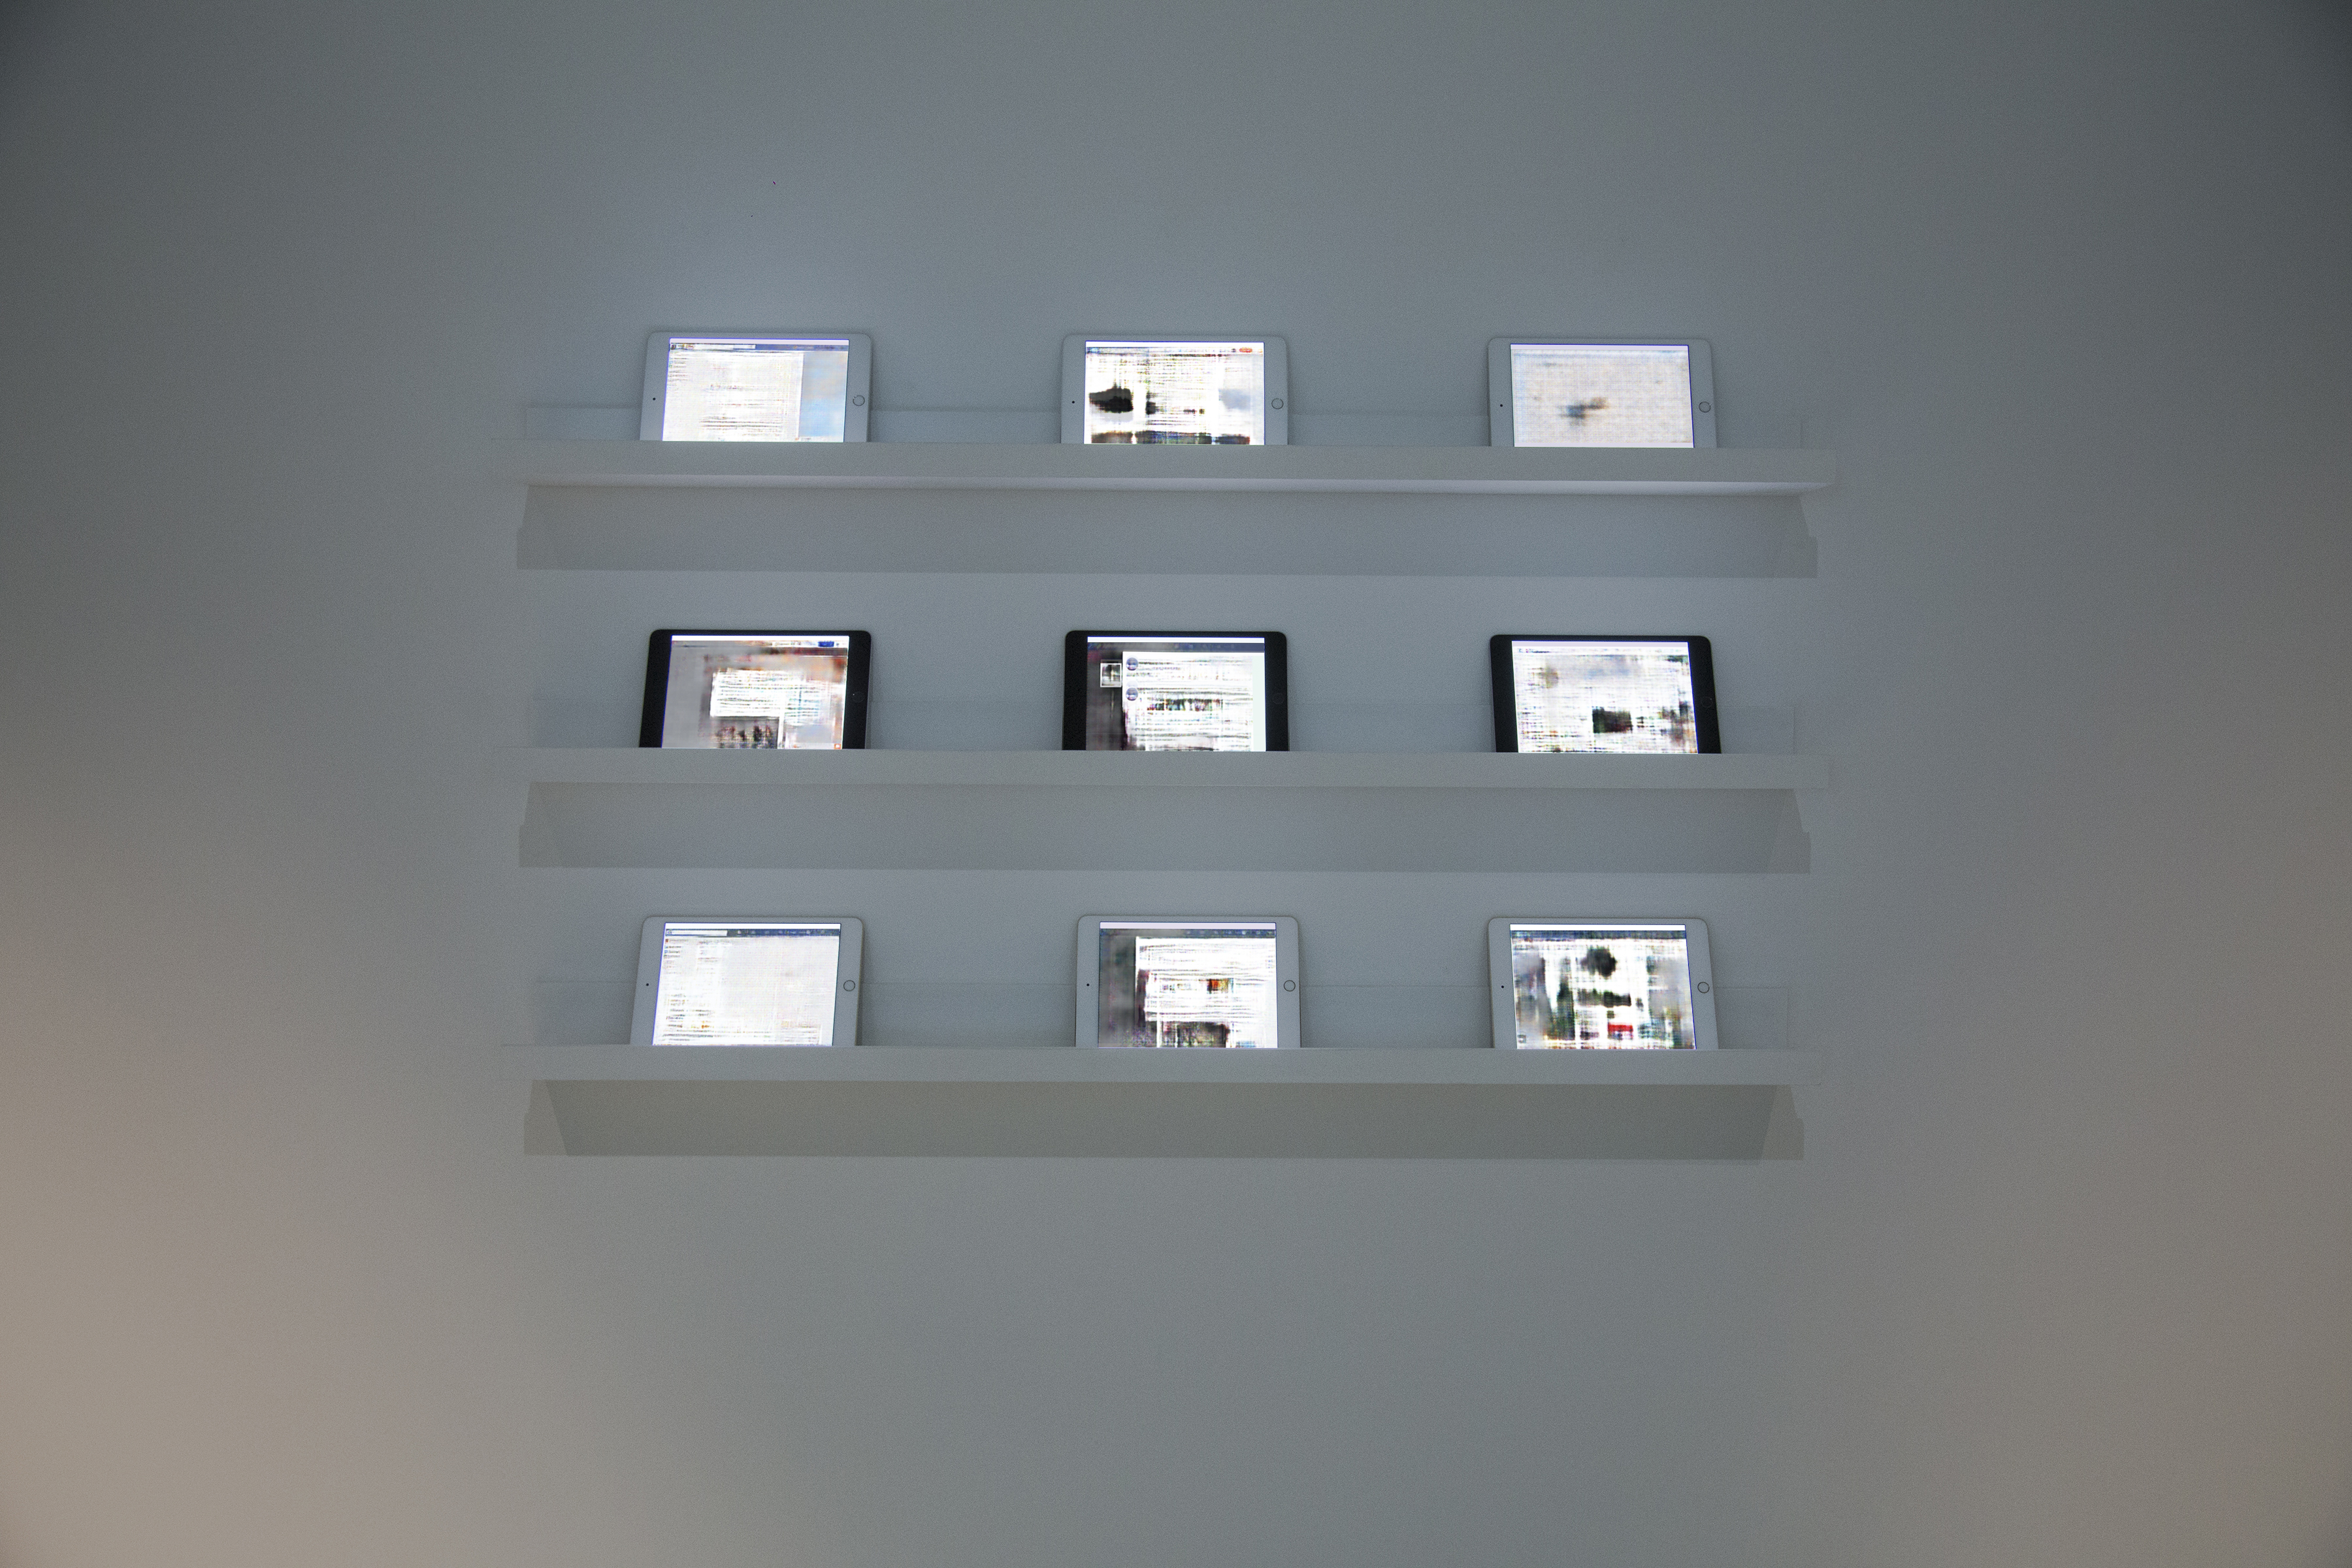 Perverse affordances installed in 9 channels on ipads as part of Scaffolds I can no longer See at Interaccess